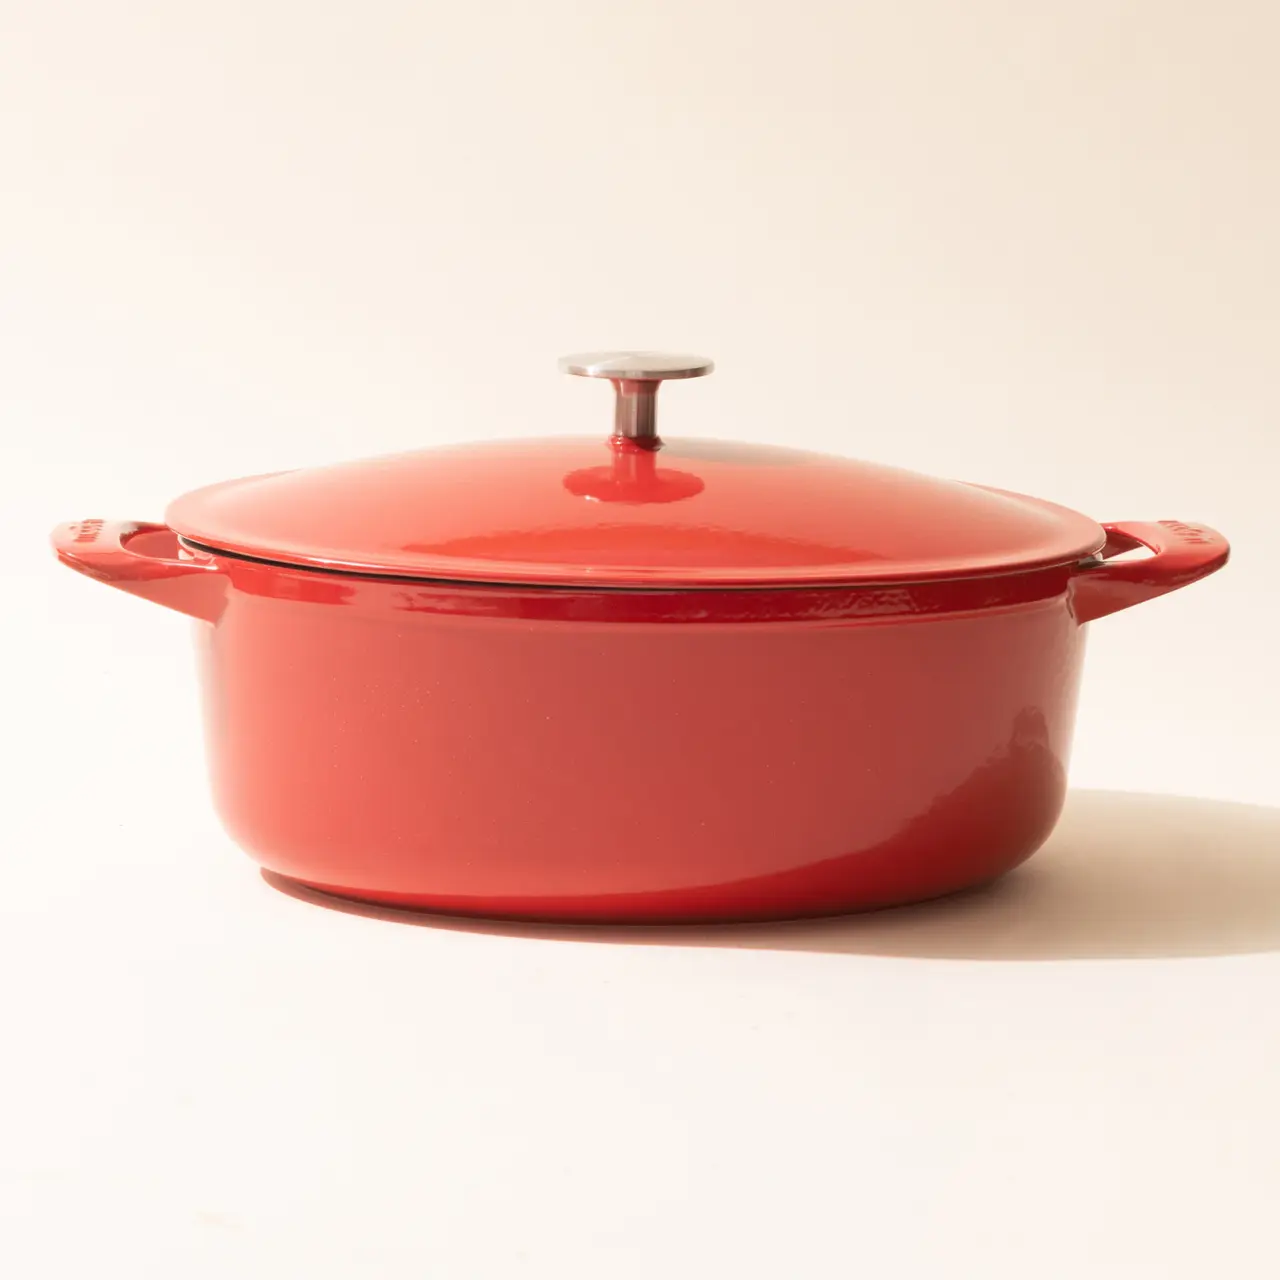 oval dutch oven made in red